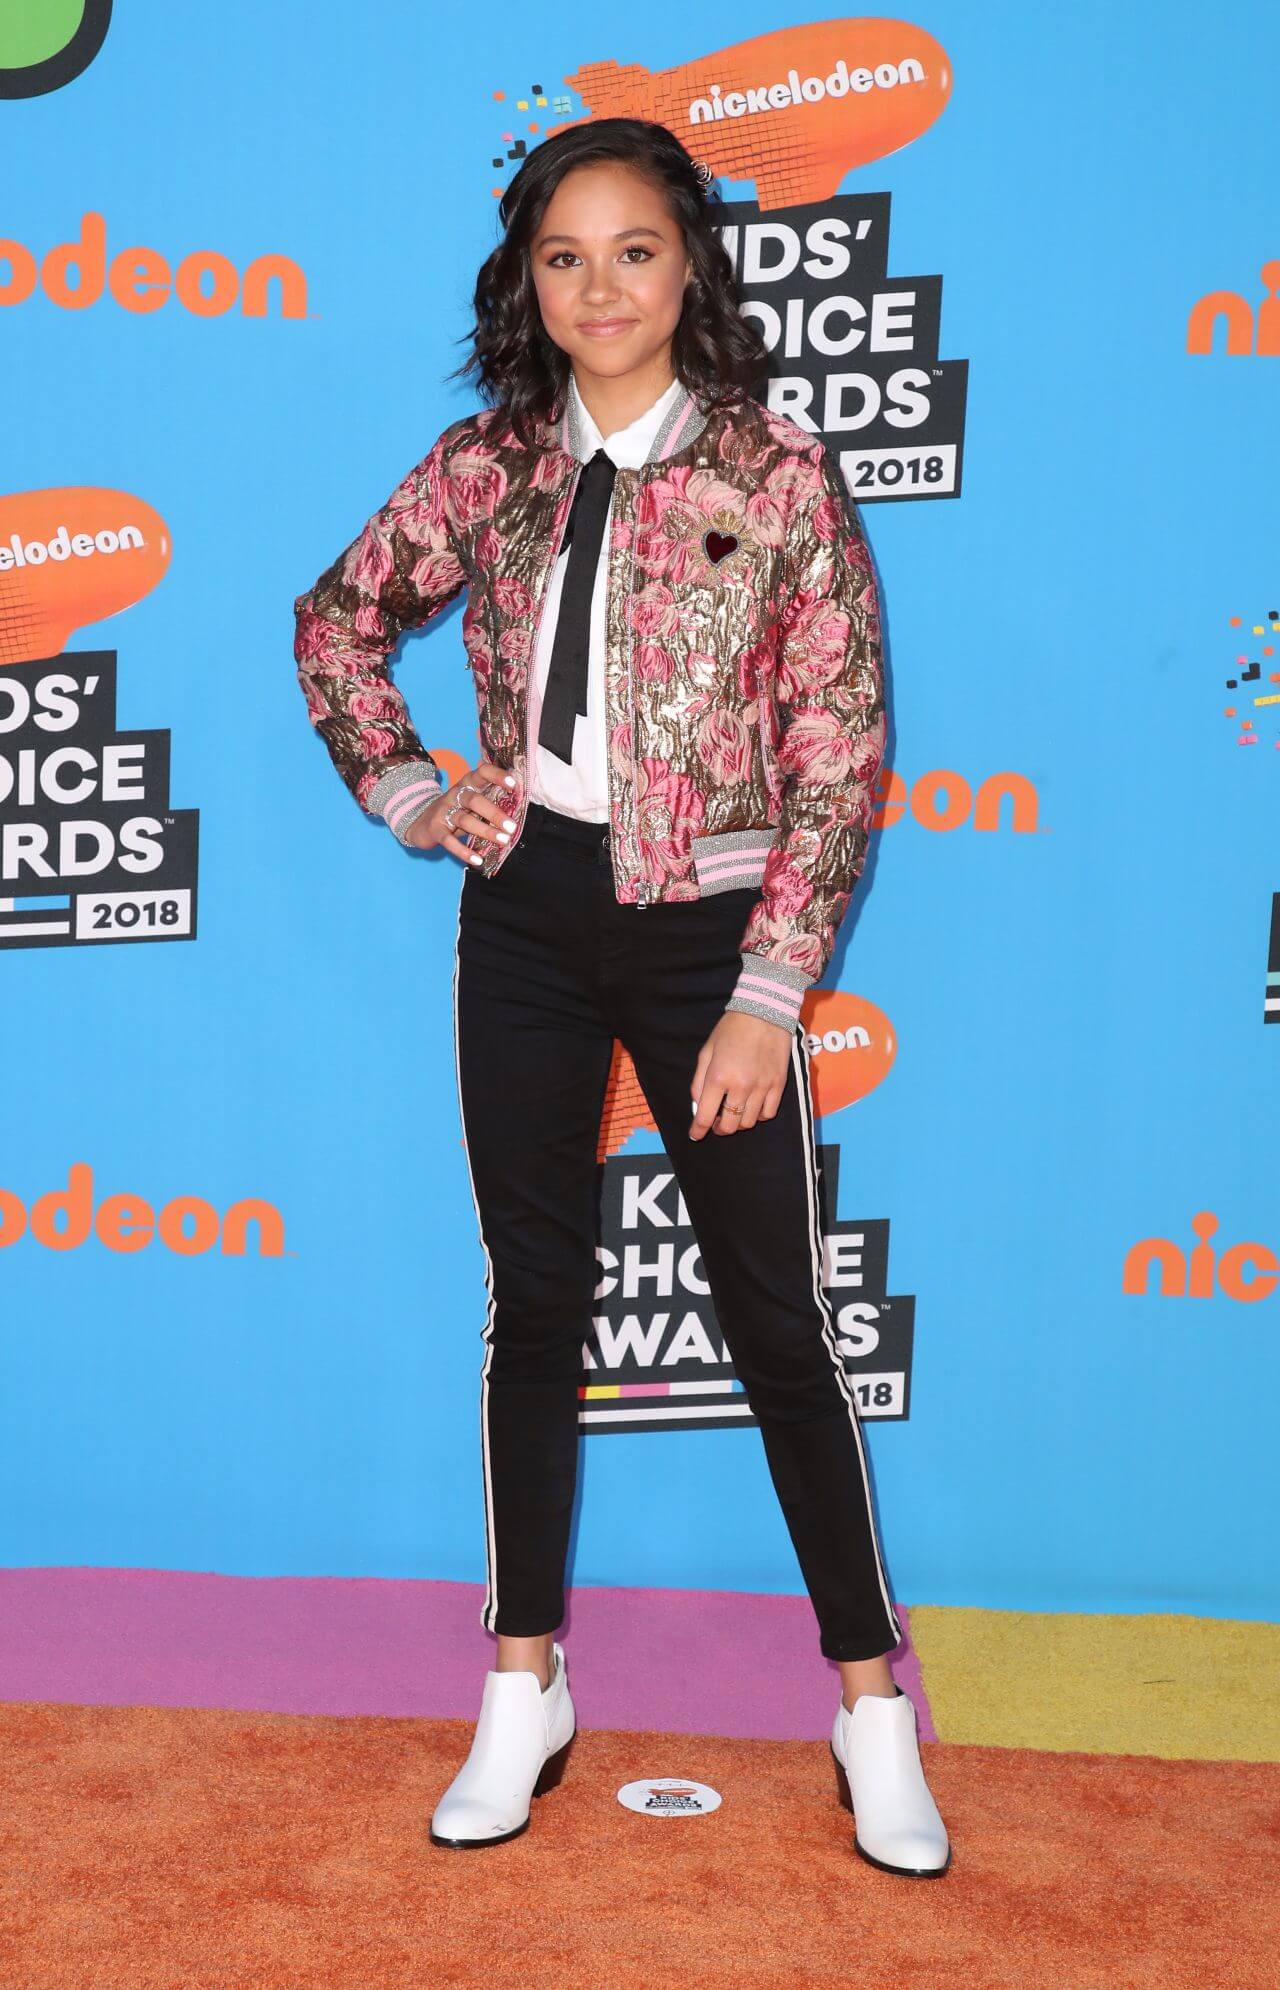 Breanna Yde Pretty Looks In Printed Jacket Under White Shirt & Black Jeans At Nickelodeon Kids’ Choice Awards